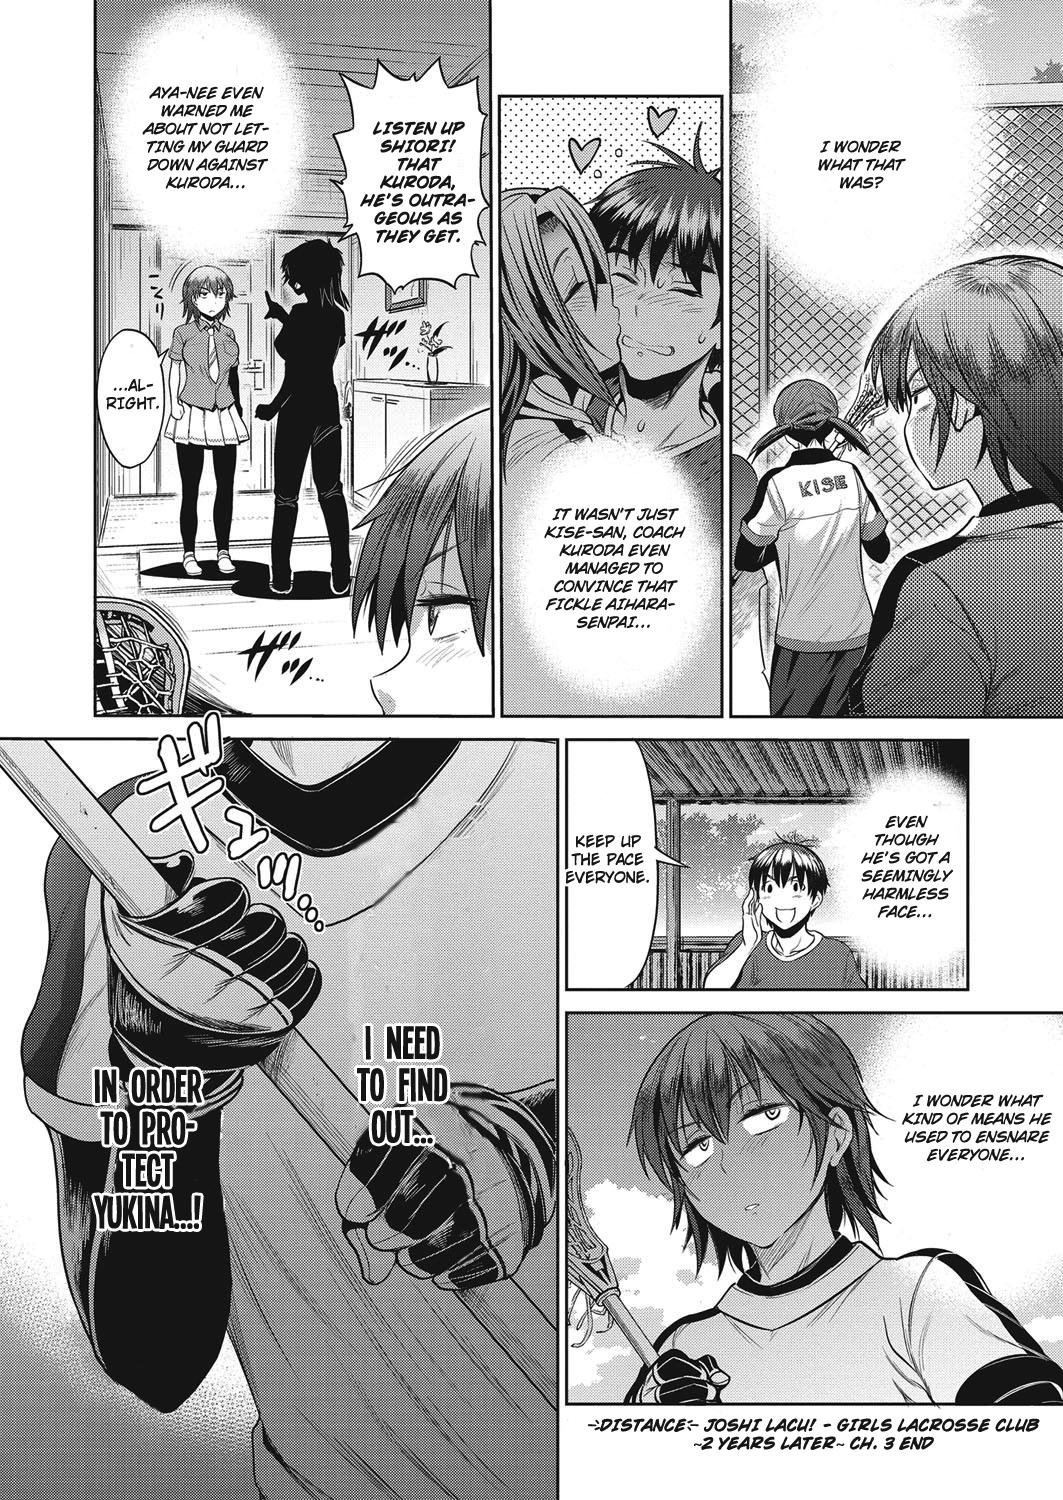 Latina [DISTANCE] Joshi Lacu! - Girls Lacrosse Club ~2 Years Later~ Ch. 3 (COMIC ExE 04) [English] [TripleSevenScans] [Digital] Aunty - Page 40